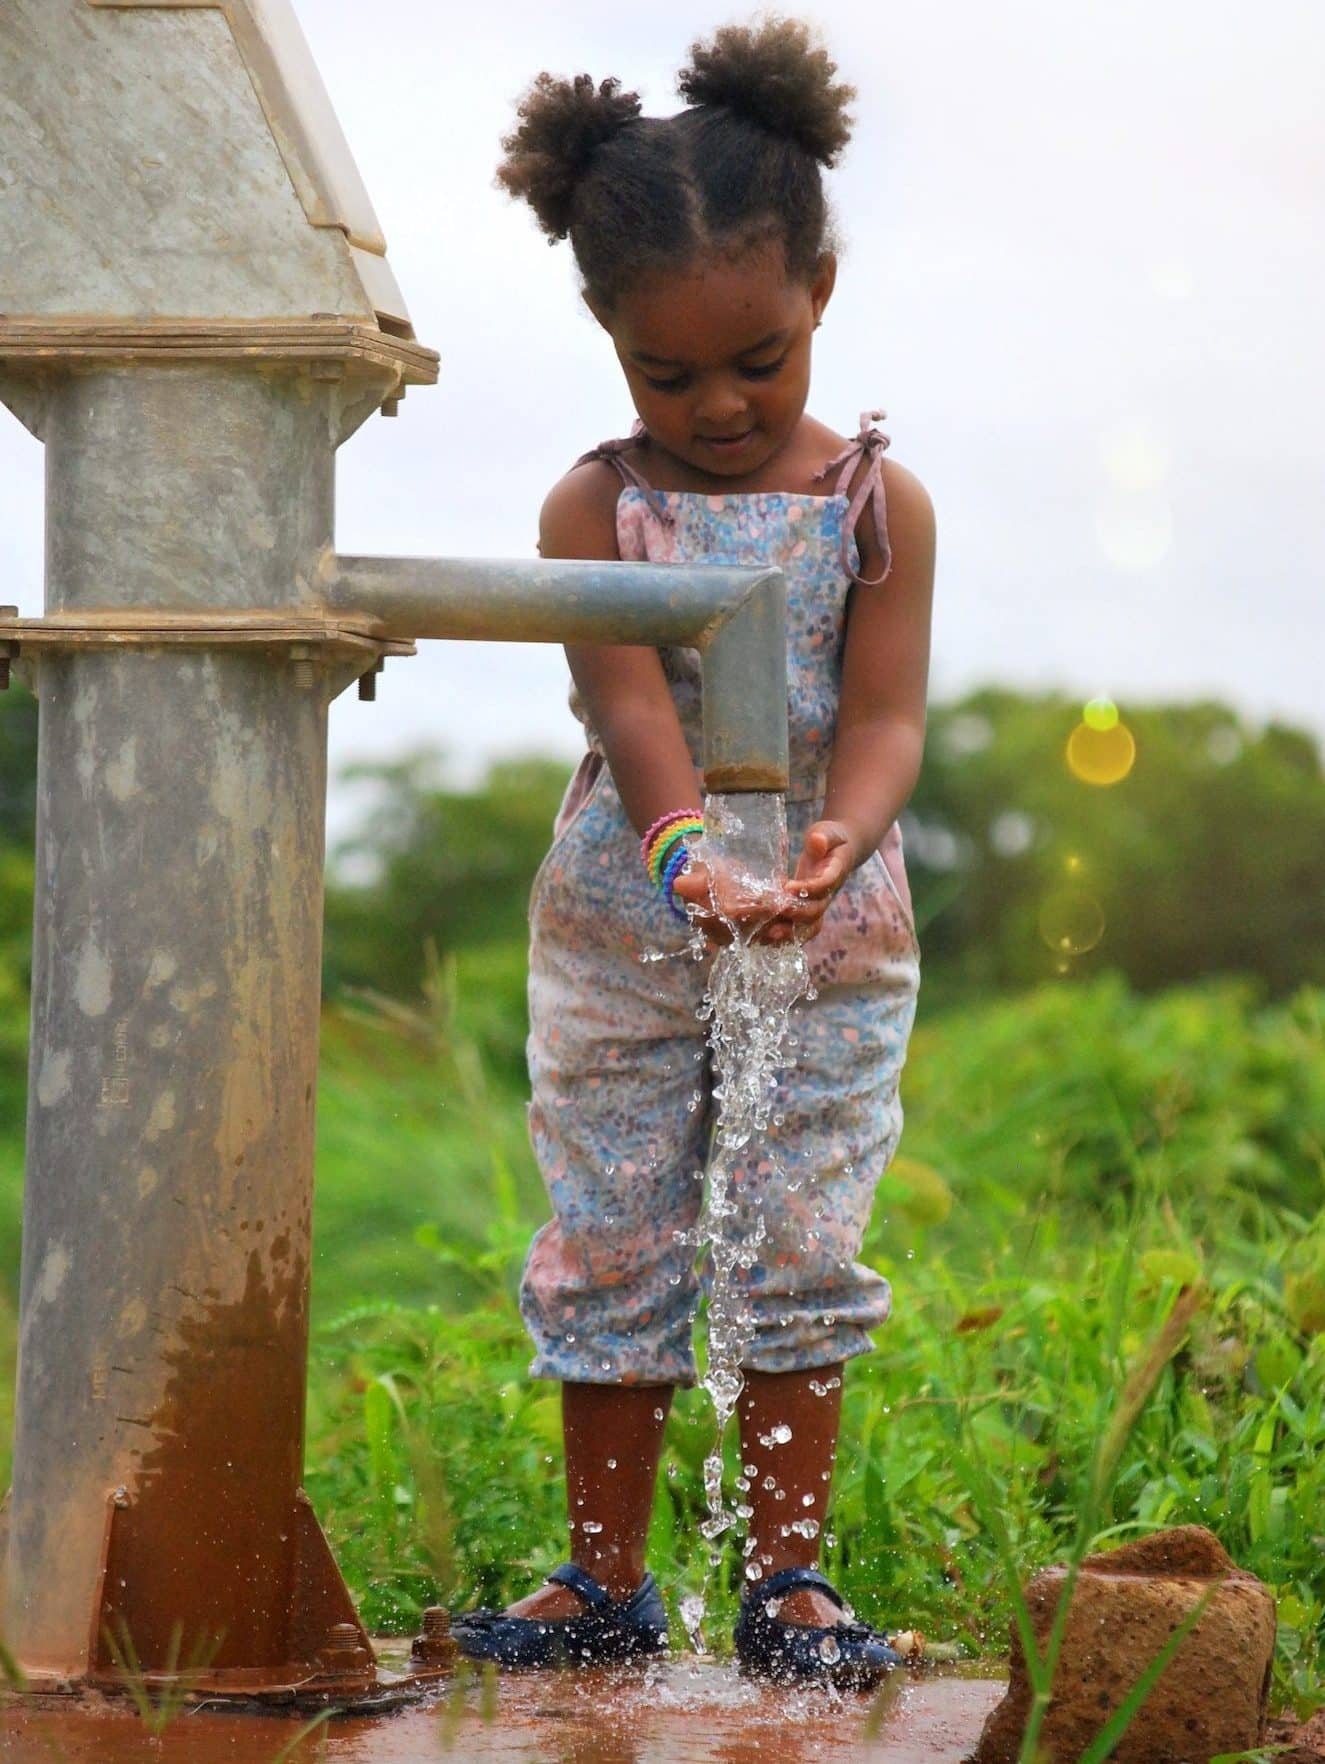 girl-washing-her-hands-at-a-water-well-in-burkina-faso-africa-e1659542851666.jpg